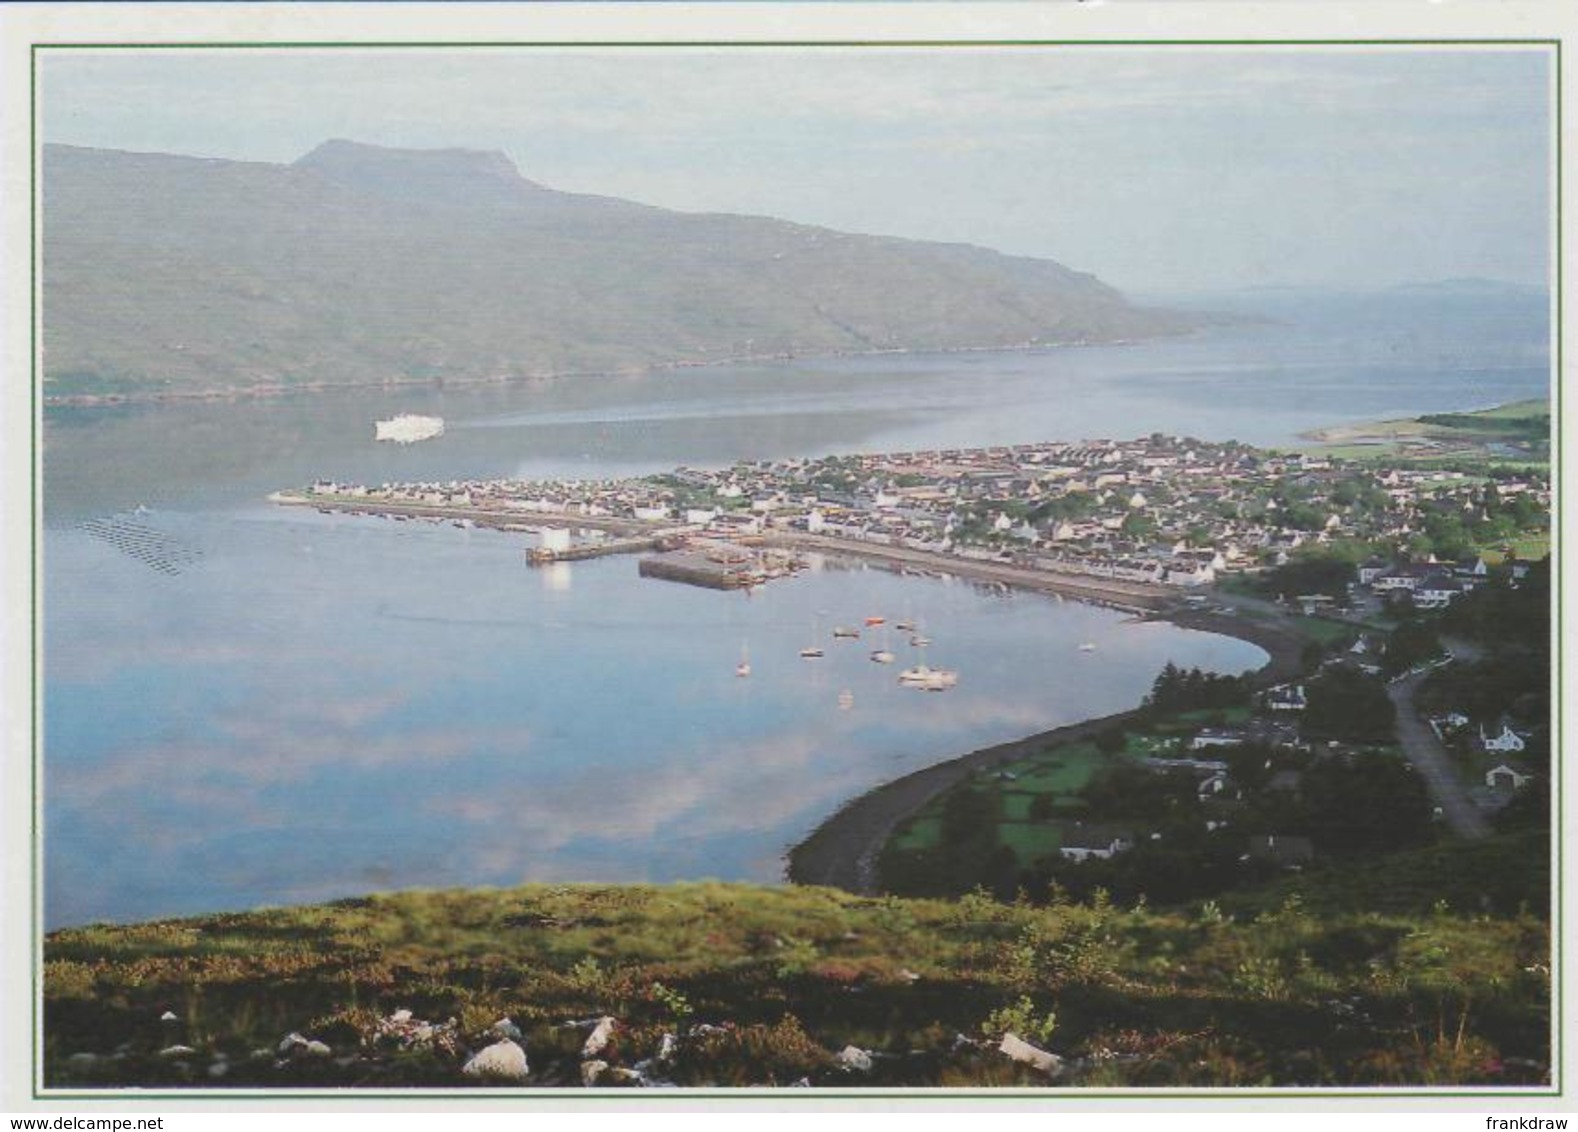 Postcard - Ullapool And The Reflections In Loch Broom, Ross And Cromarty - Posted  9th June 2000 Very Good - Unclassified